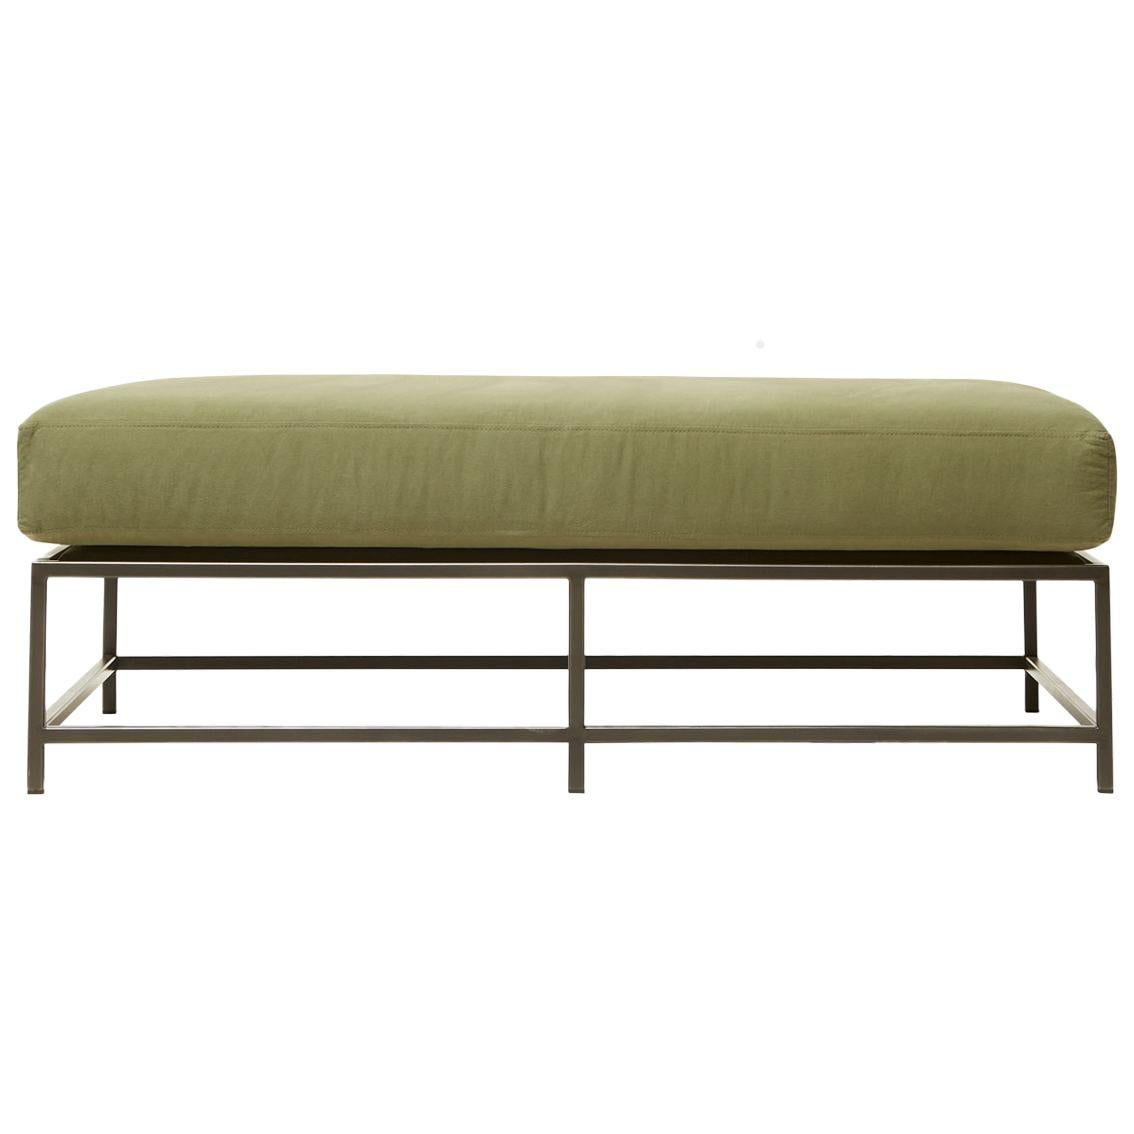 Olive Canvas and Blackened Steel Bench For Sale